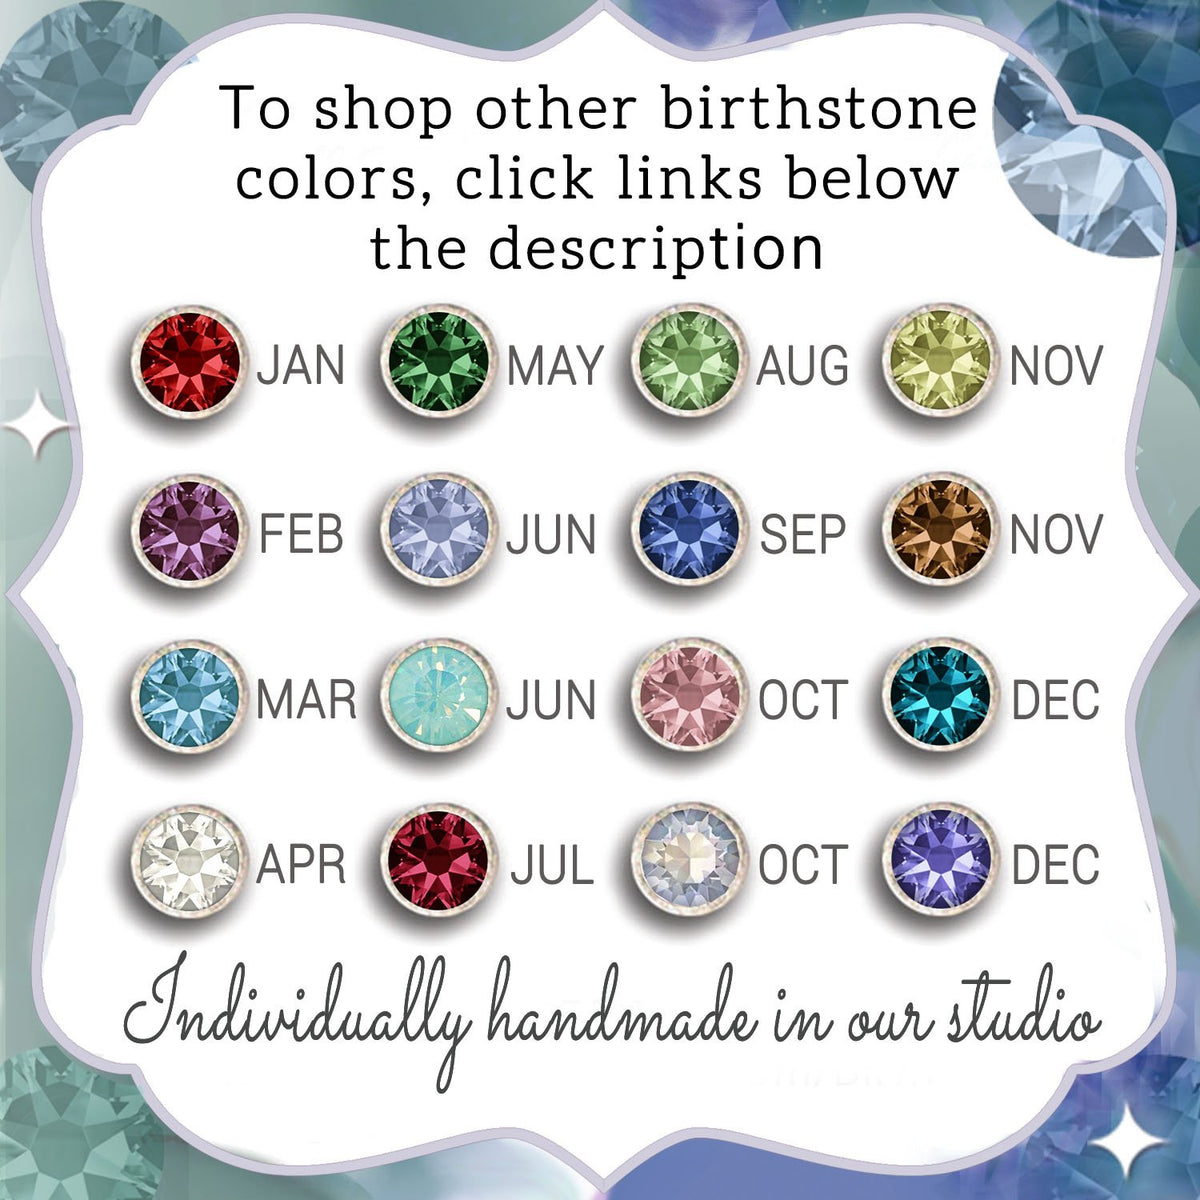 Stackable March Birthstone Ring - Aquamarine Blue - Sweet Romance Wholesale